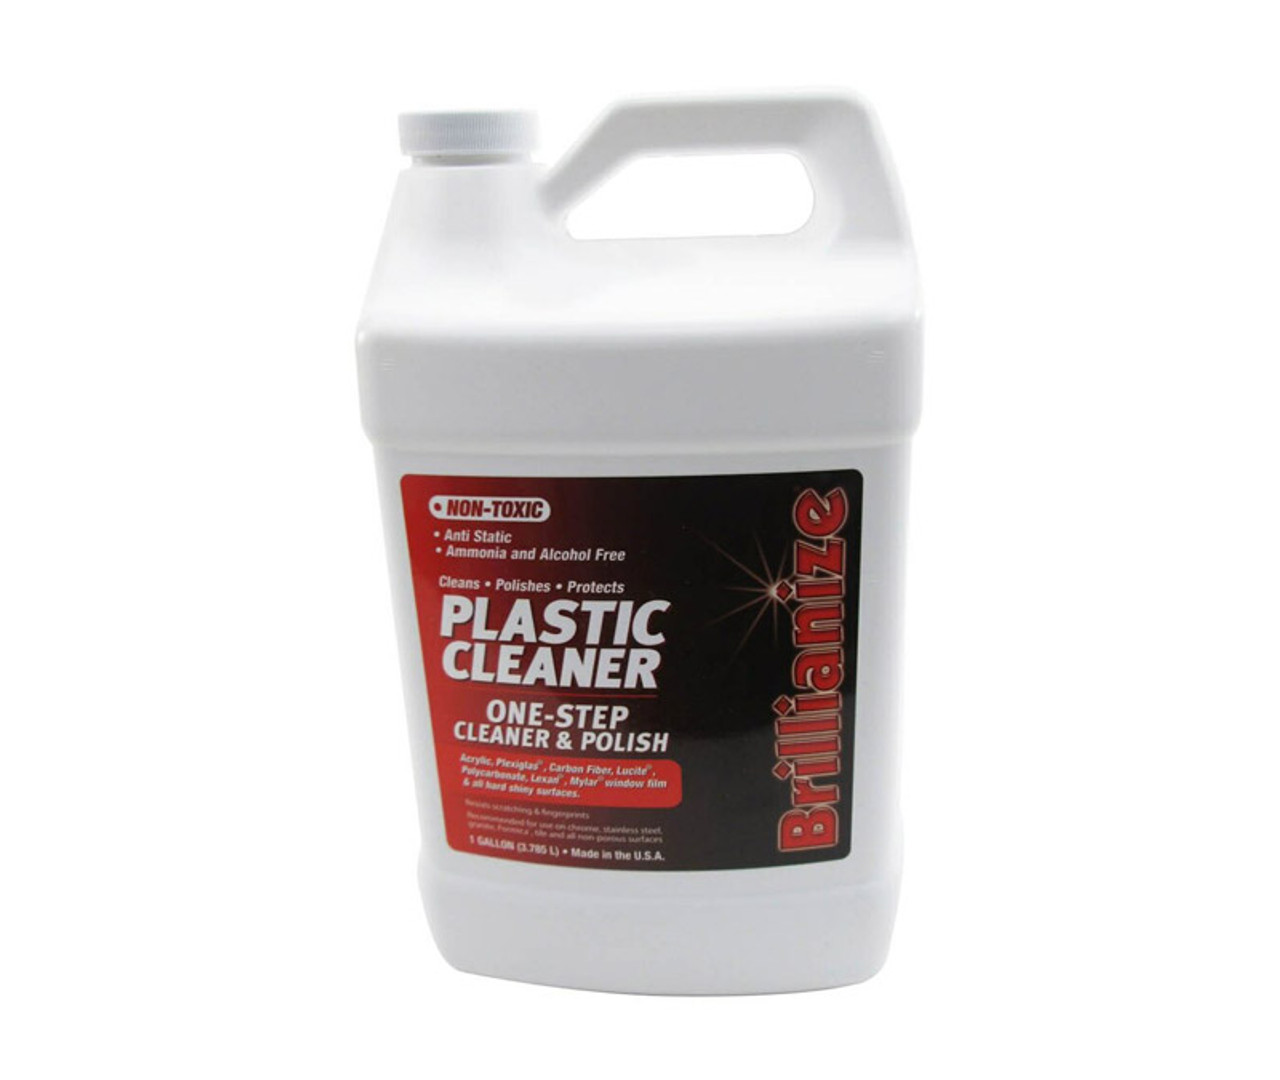 Brillianize Plastic And Glass Cleaner And Polish